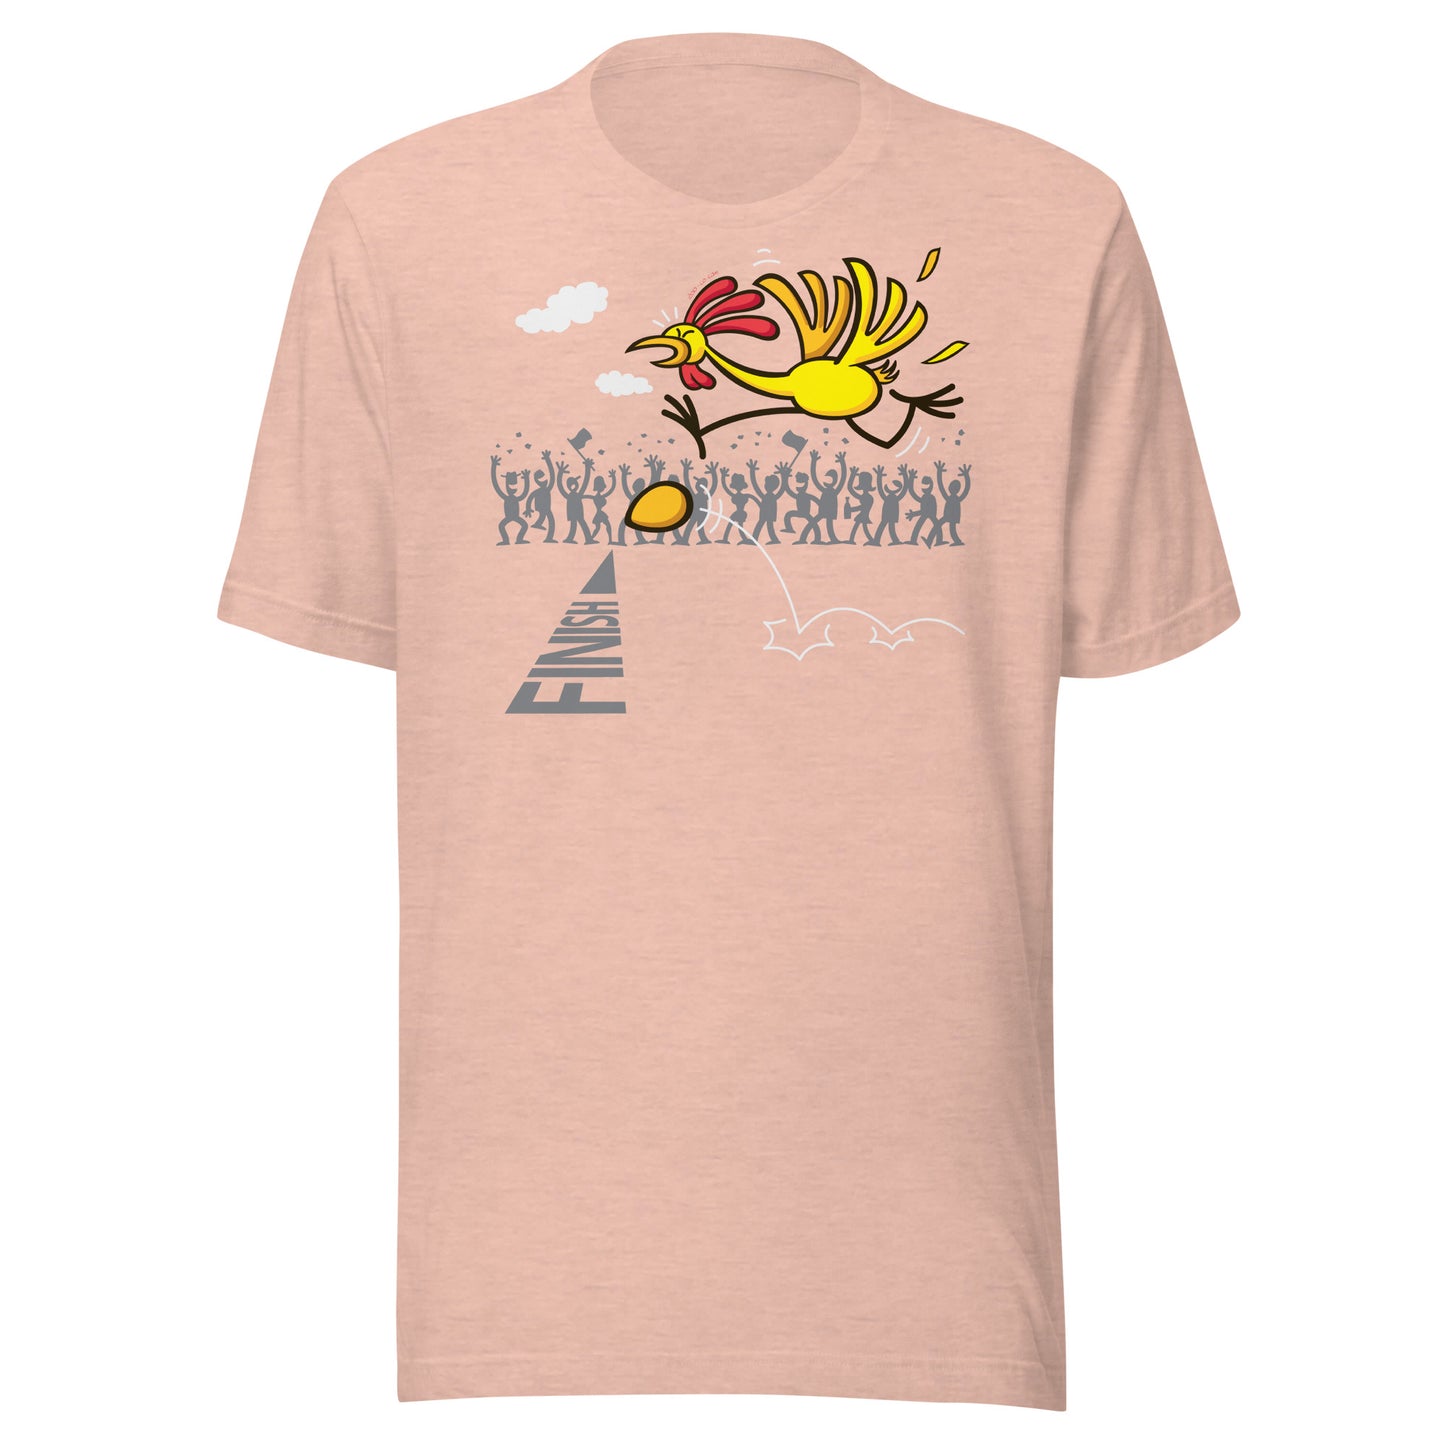 Chicken or egg, scrambled forever, eternal dilemma Unisex t-shirt. Heather prism peach. Front view